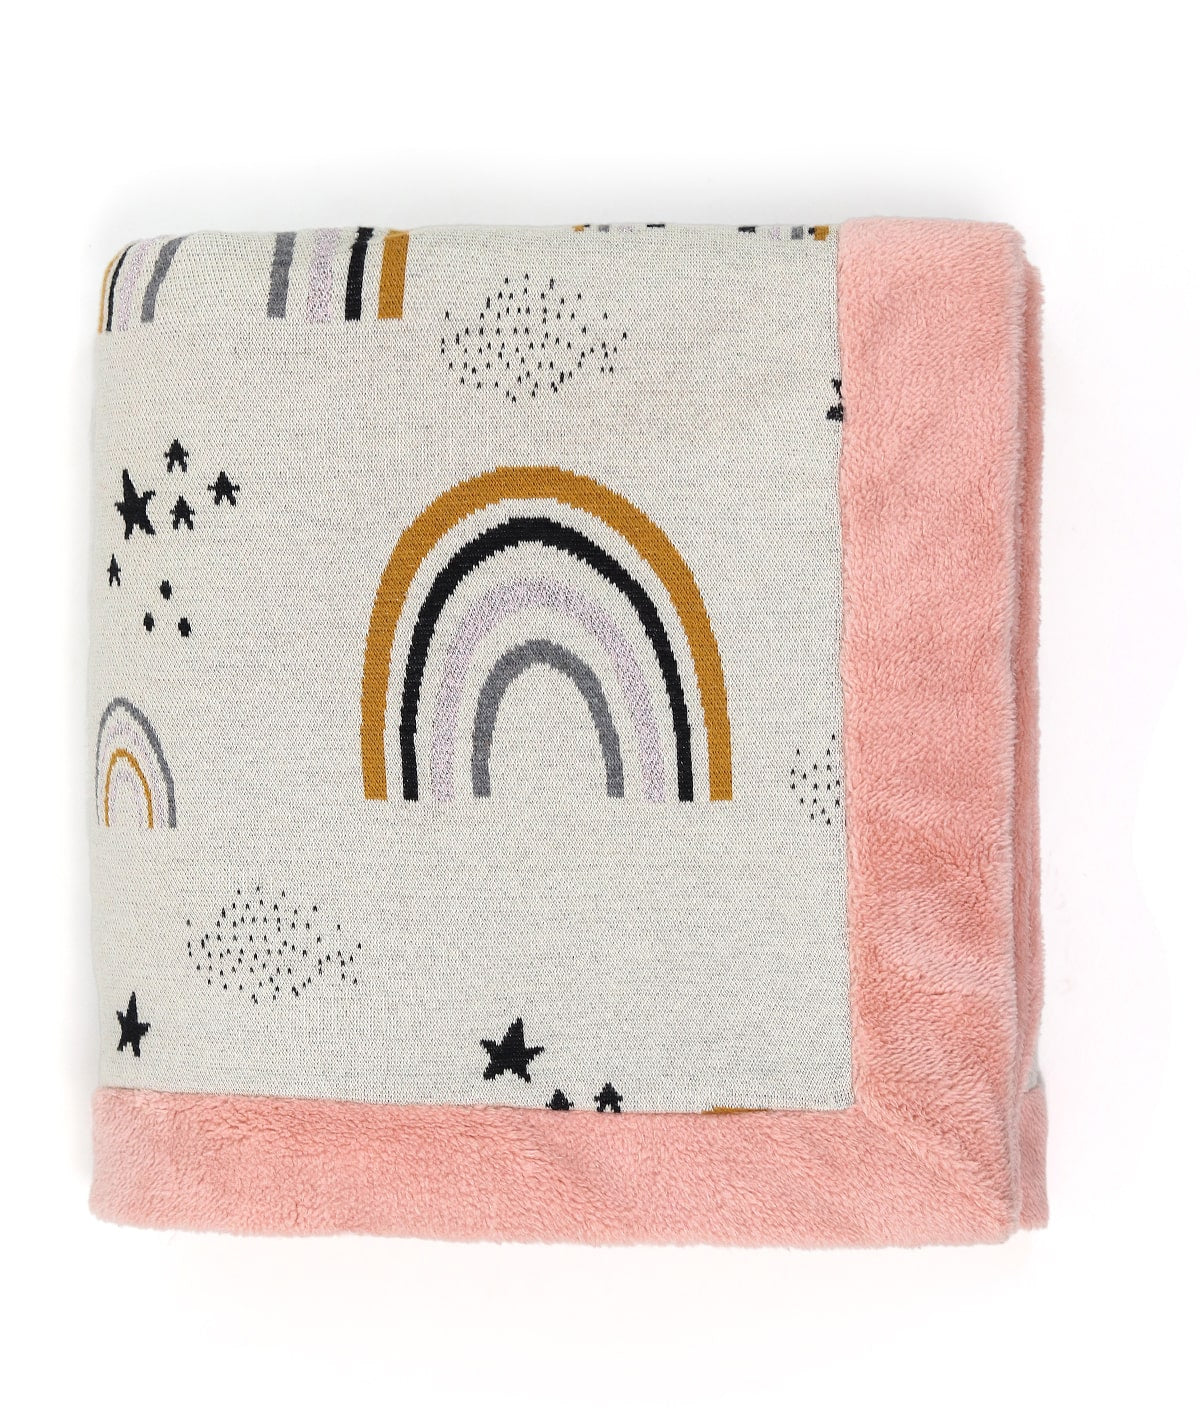 Dance with Rainbows - Natural, Light Pink & Multi Color Cotton Knitted Blanket With Faux Fur Back For Kids